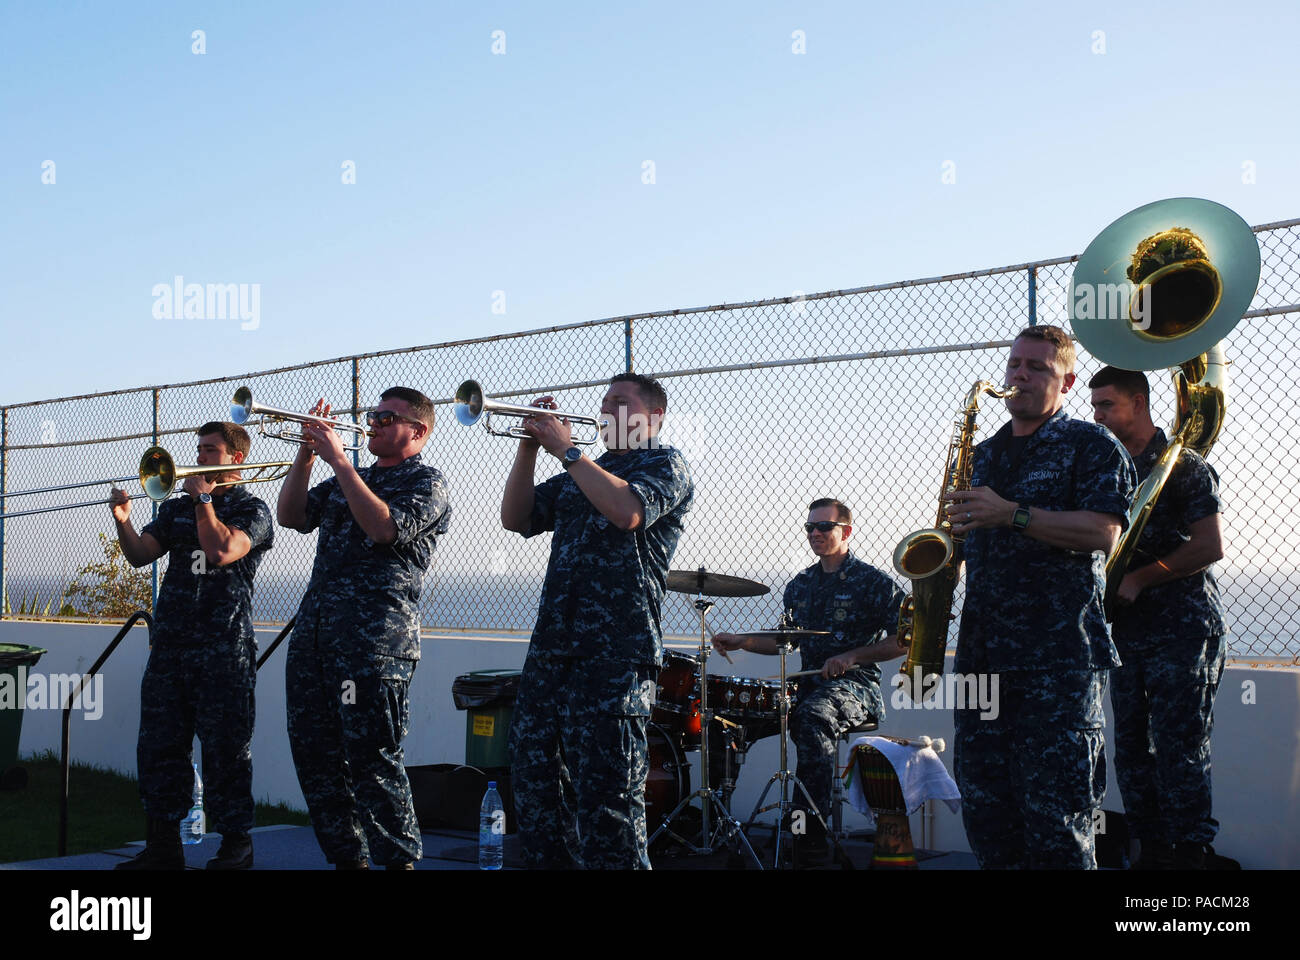 160318-N-ZZ999-014 DAKAR, Senegal (March 18, 2016) The U.S. Naval Forces Europe Brass Band performs at Ebbet’s field in Dakar, Senegal for embassy staff and their families during exercise Obangame/Saharan Express 2016, March 18. Obangame/Saharan Express, one of three African regional express series exercises facilitated by U.S. Naval Forces Europe-Africa/U.S. 6th Fleet, seeks to increase regional cooperation, maritime domain awareness, information sharing practices and improve interoperability among participating forces in order to enhance maritime security and regional economic stability. (U. Stock Photo